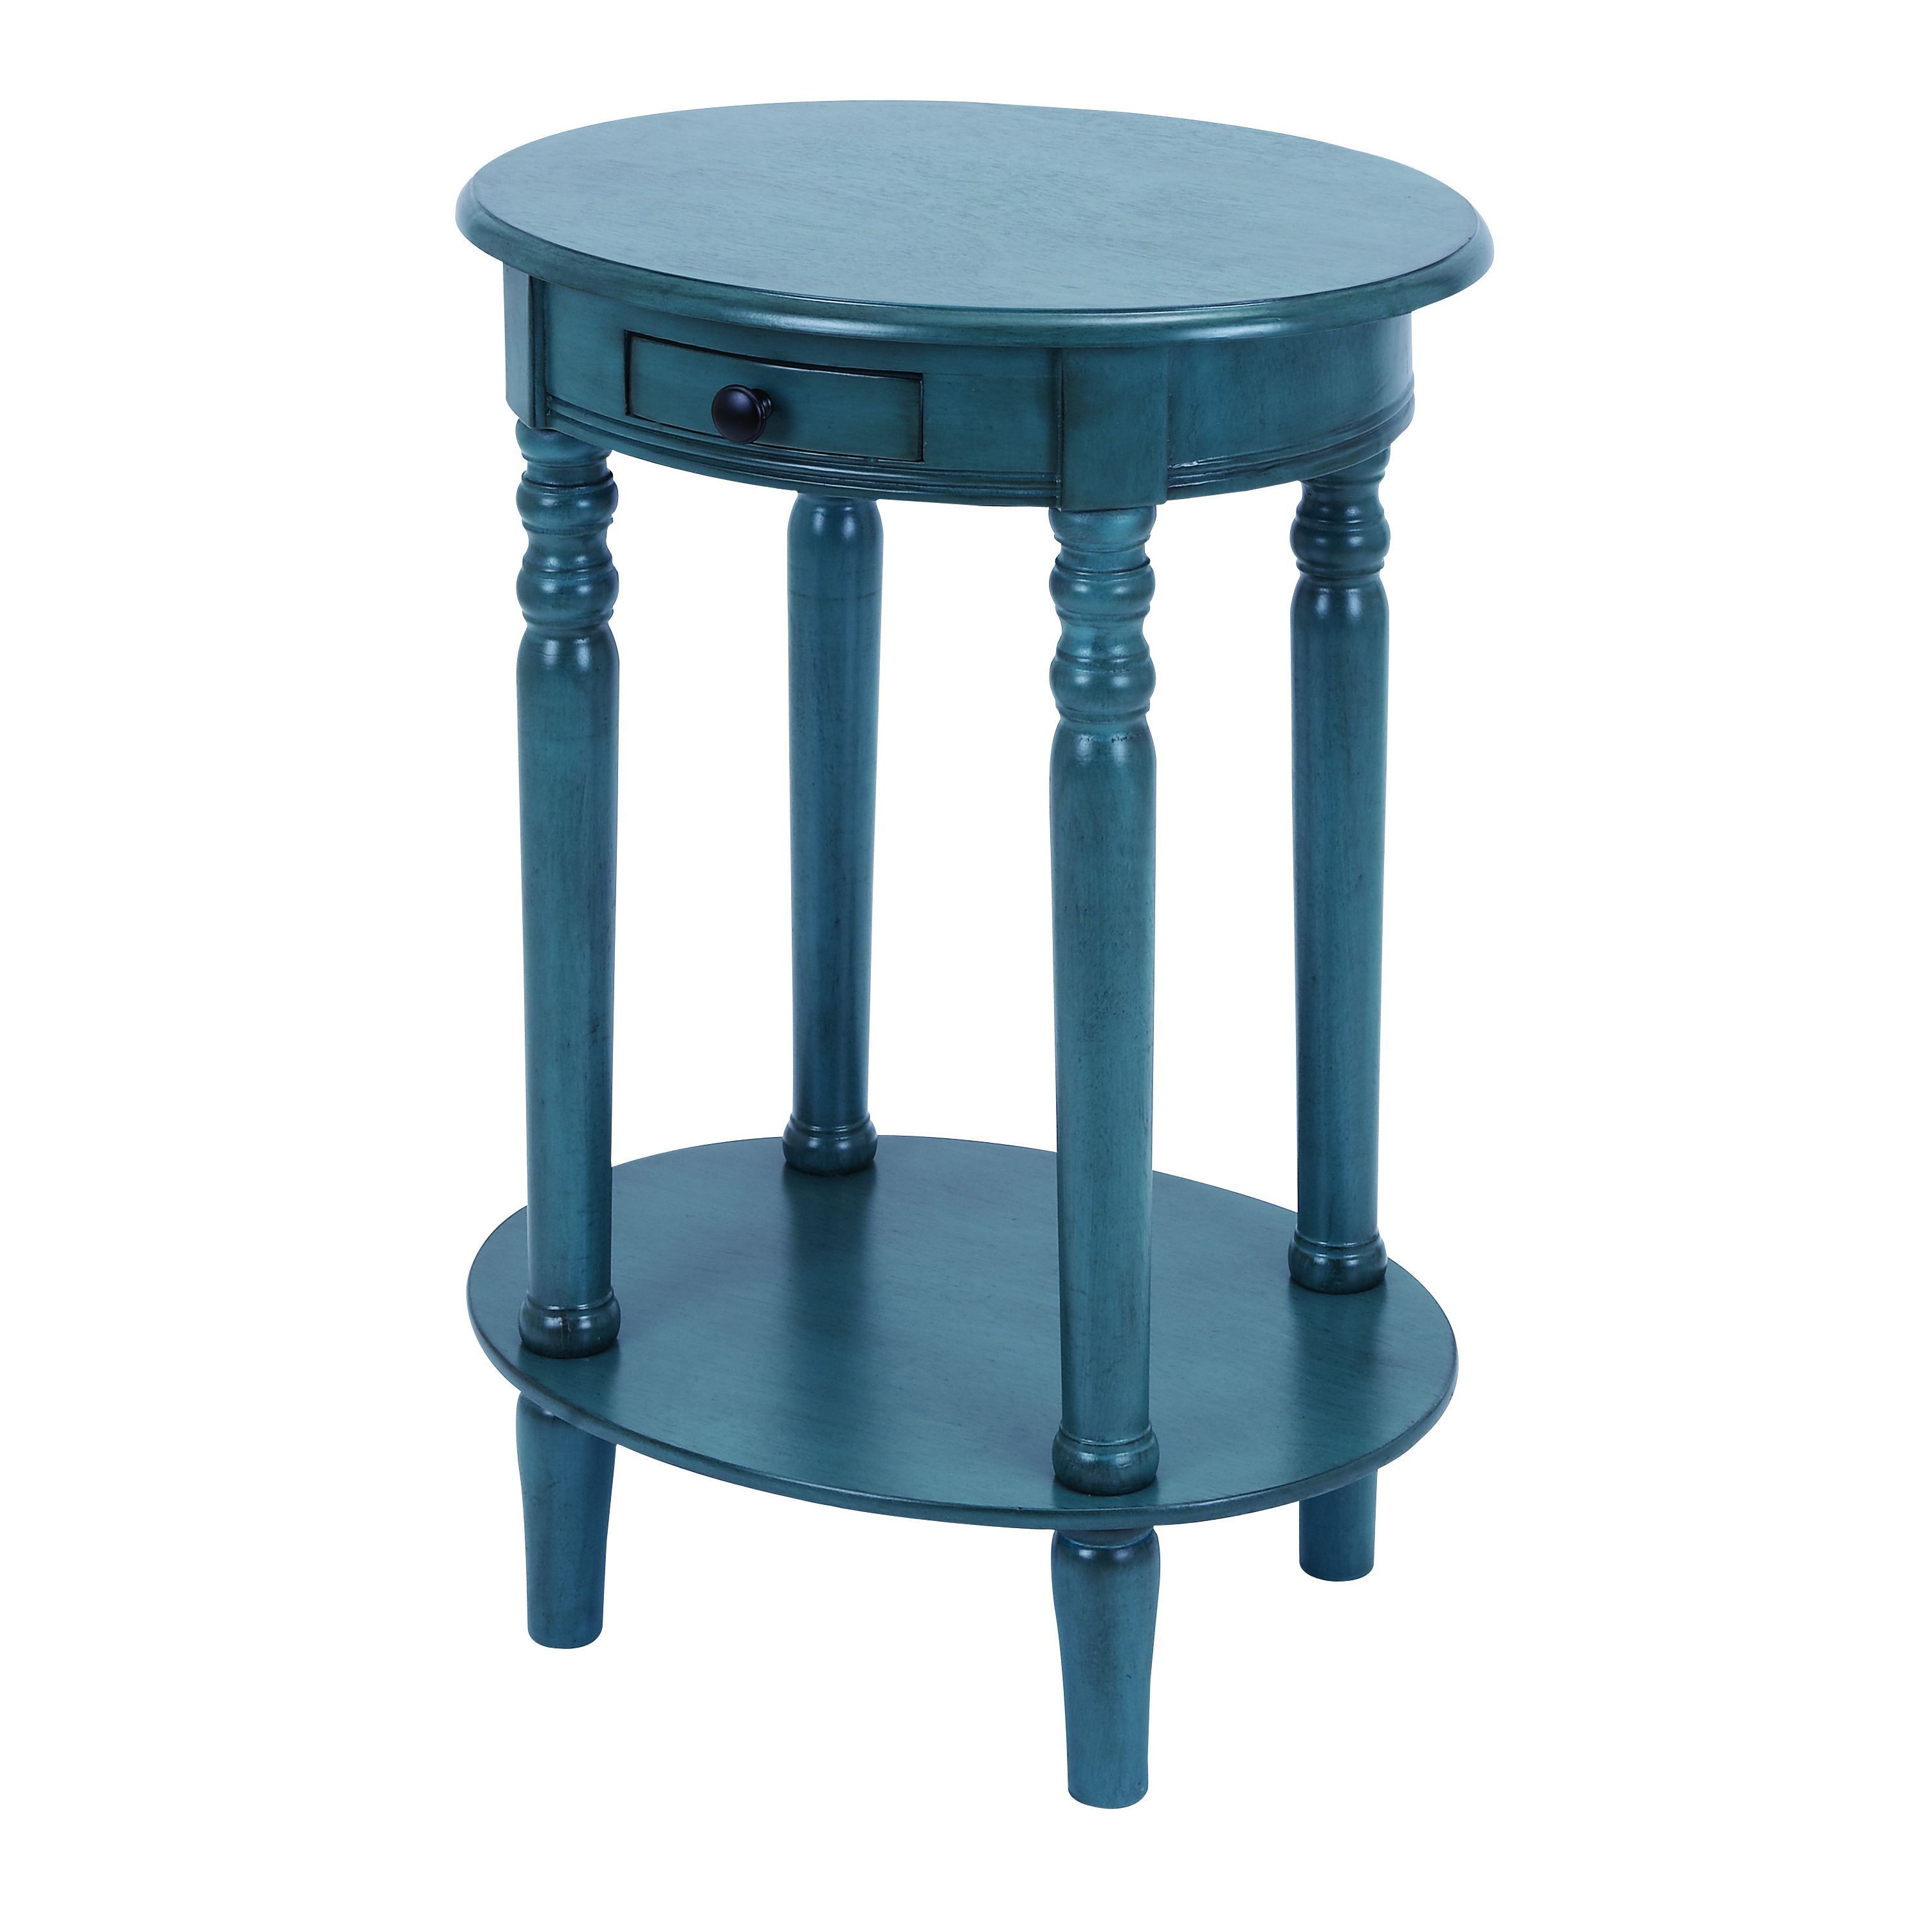 accent table with mahogany aqua blue wood free shipping today treasure trove end floor threshold transitions oval outdoor room essentials chair inch nightstand razer ouroboros